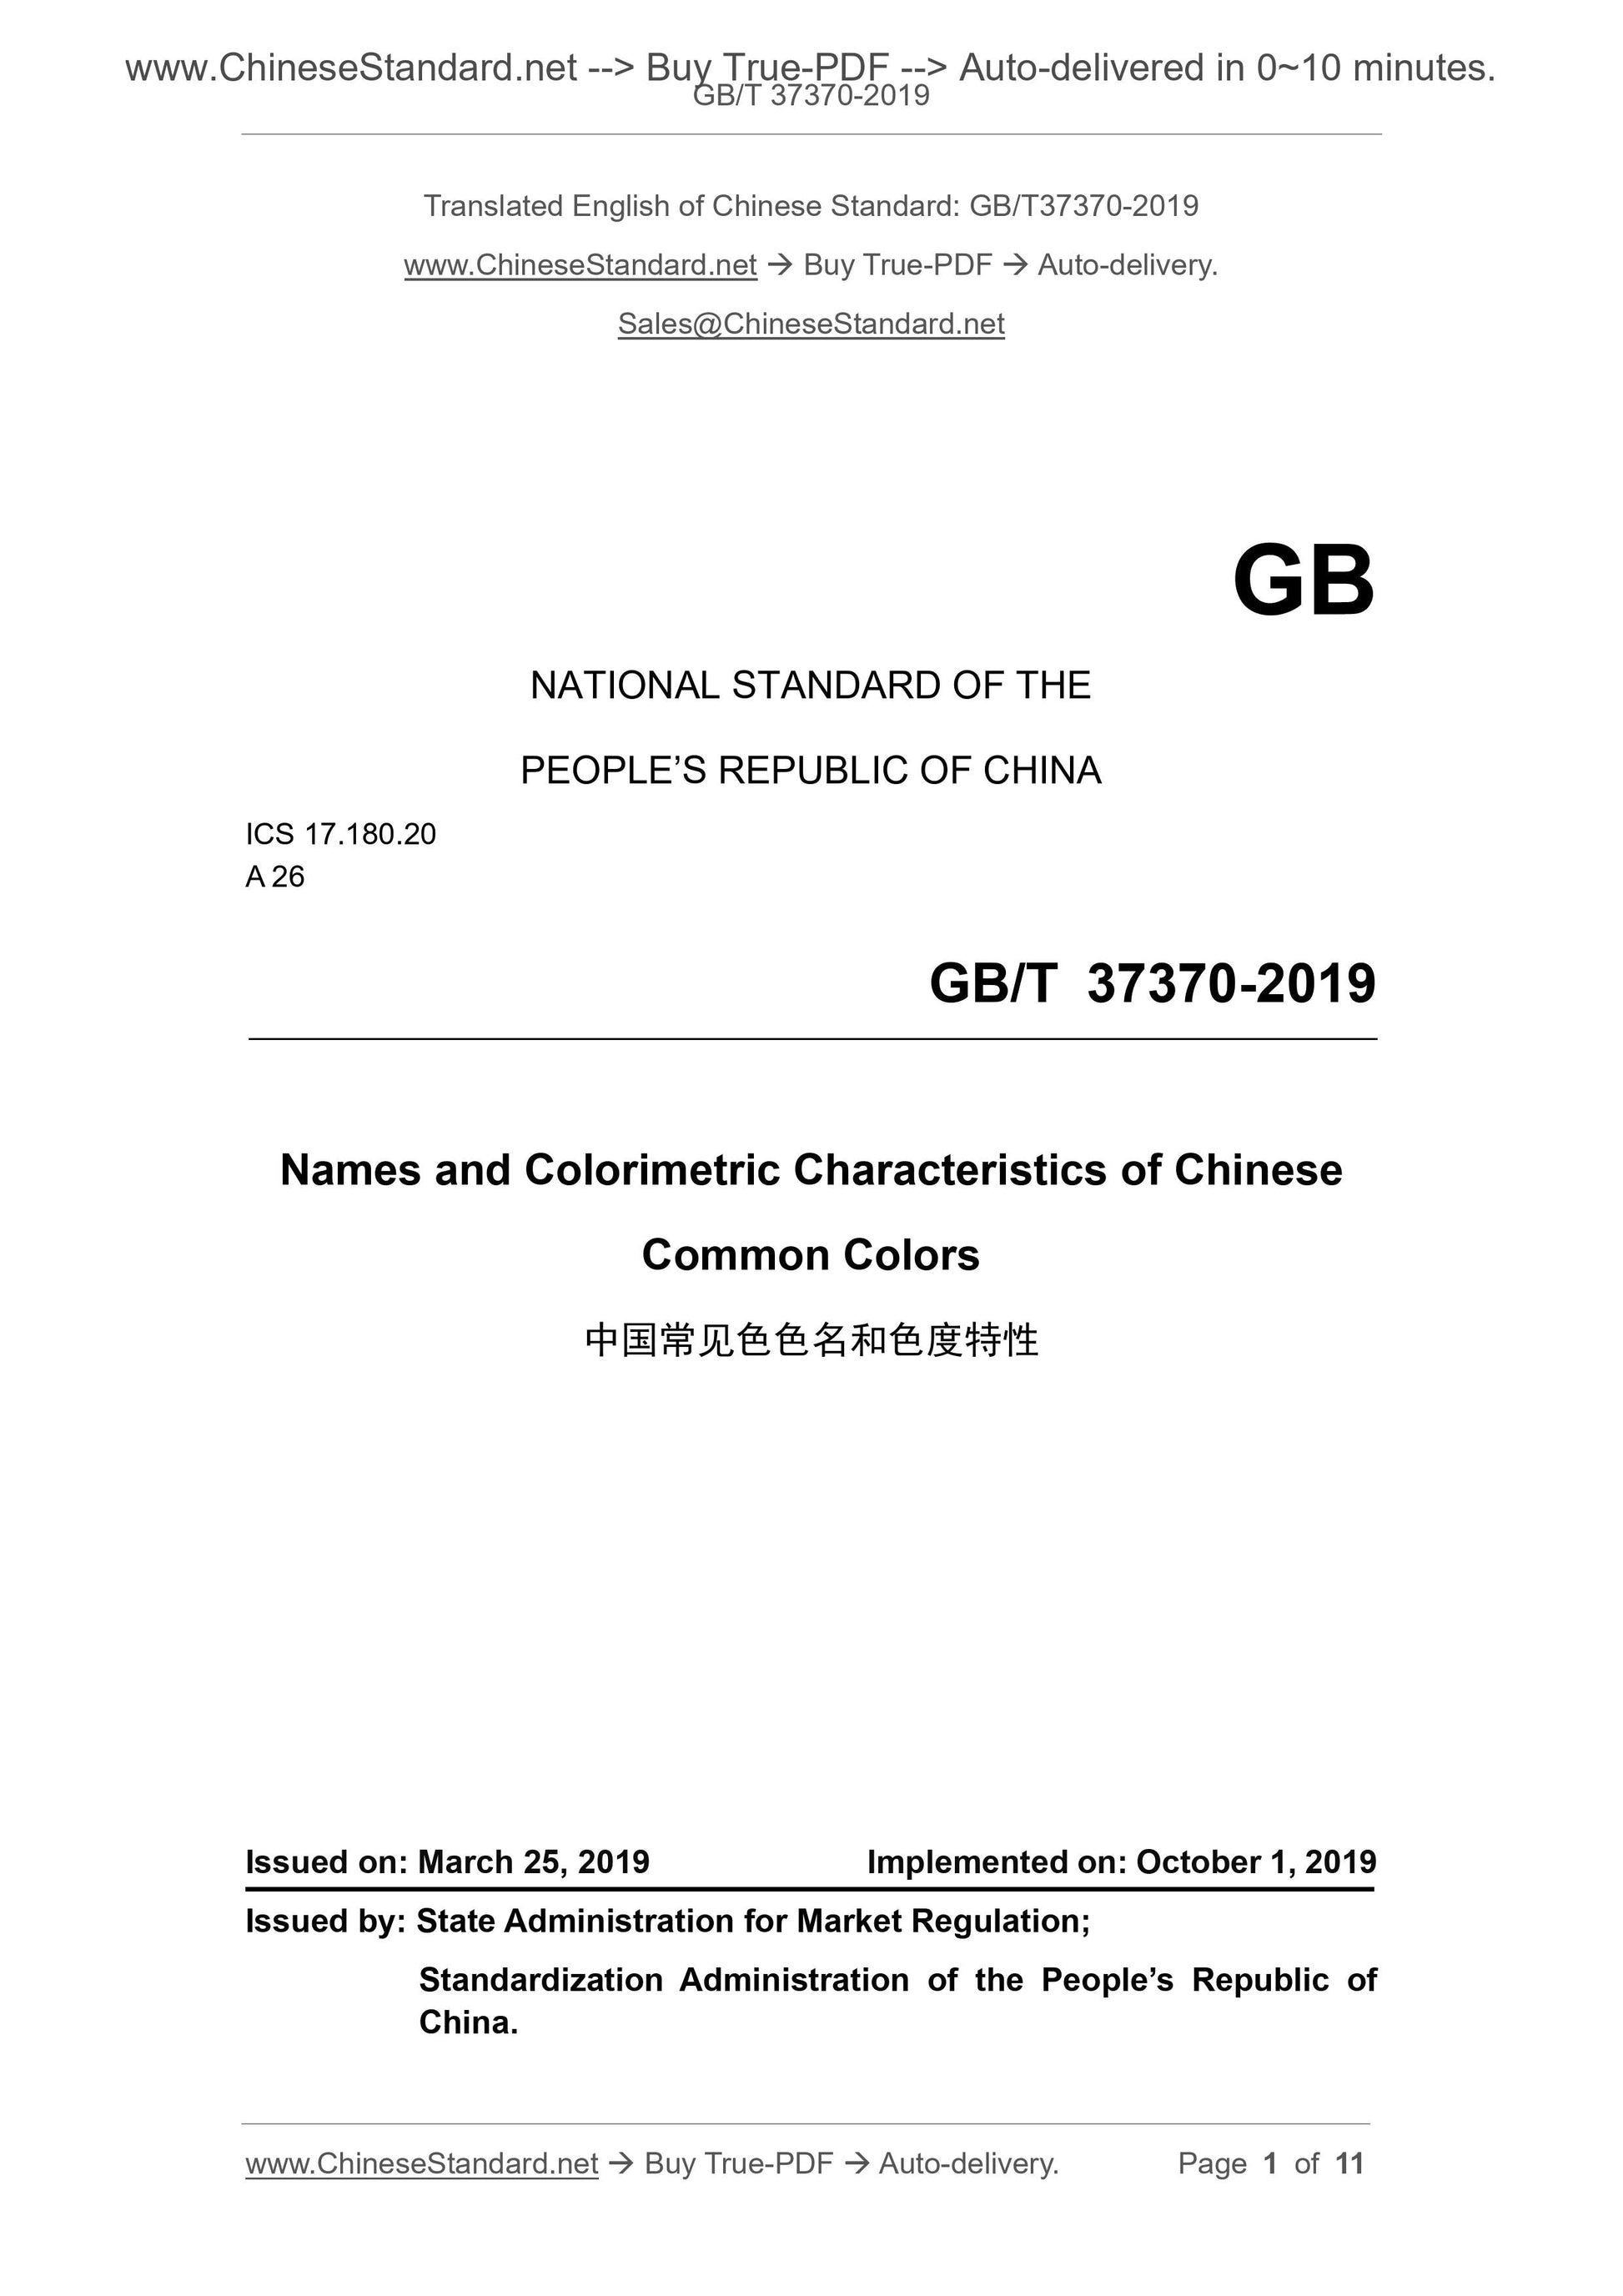 GB/T 37370-2019 Page 1